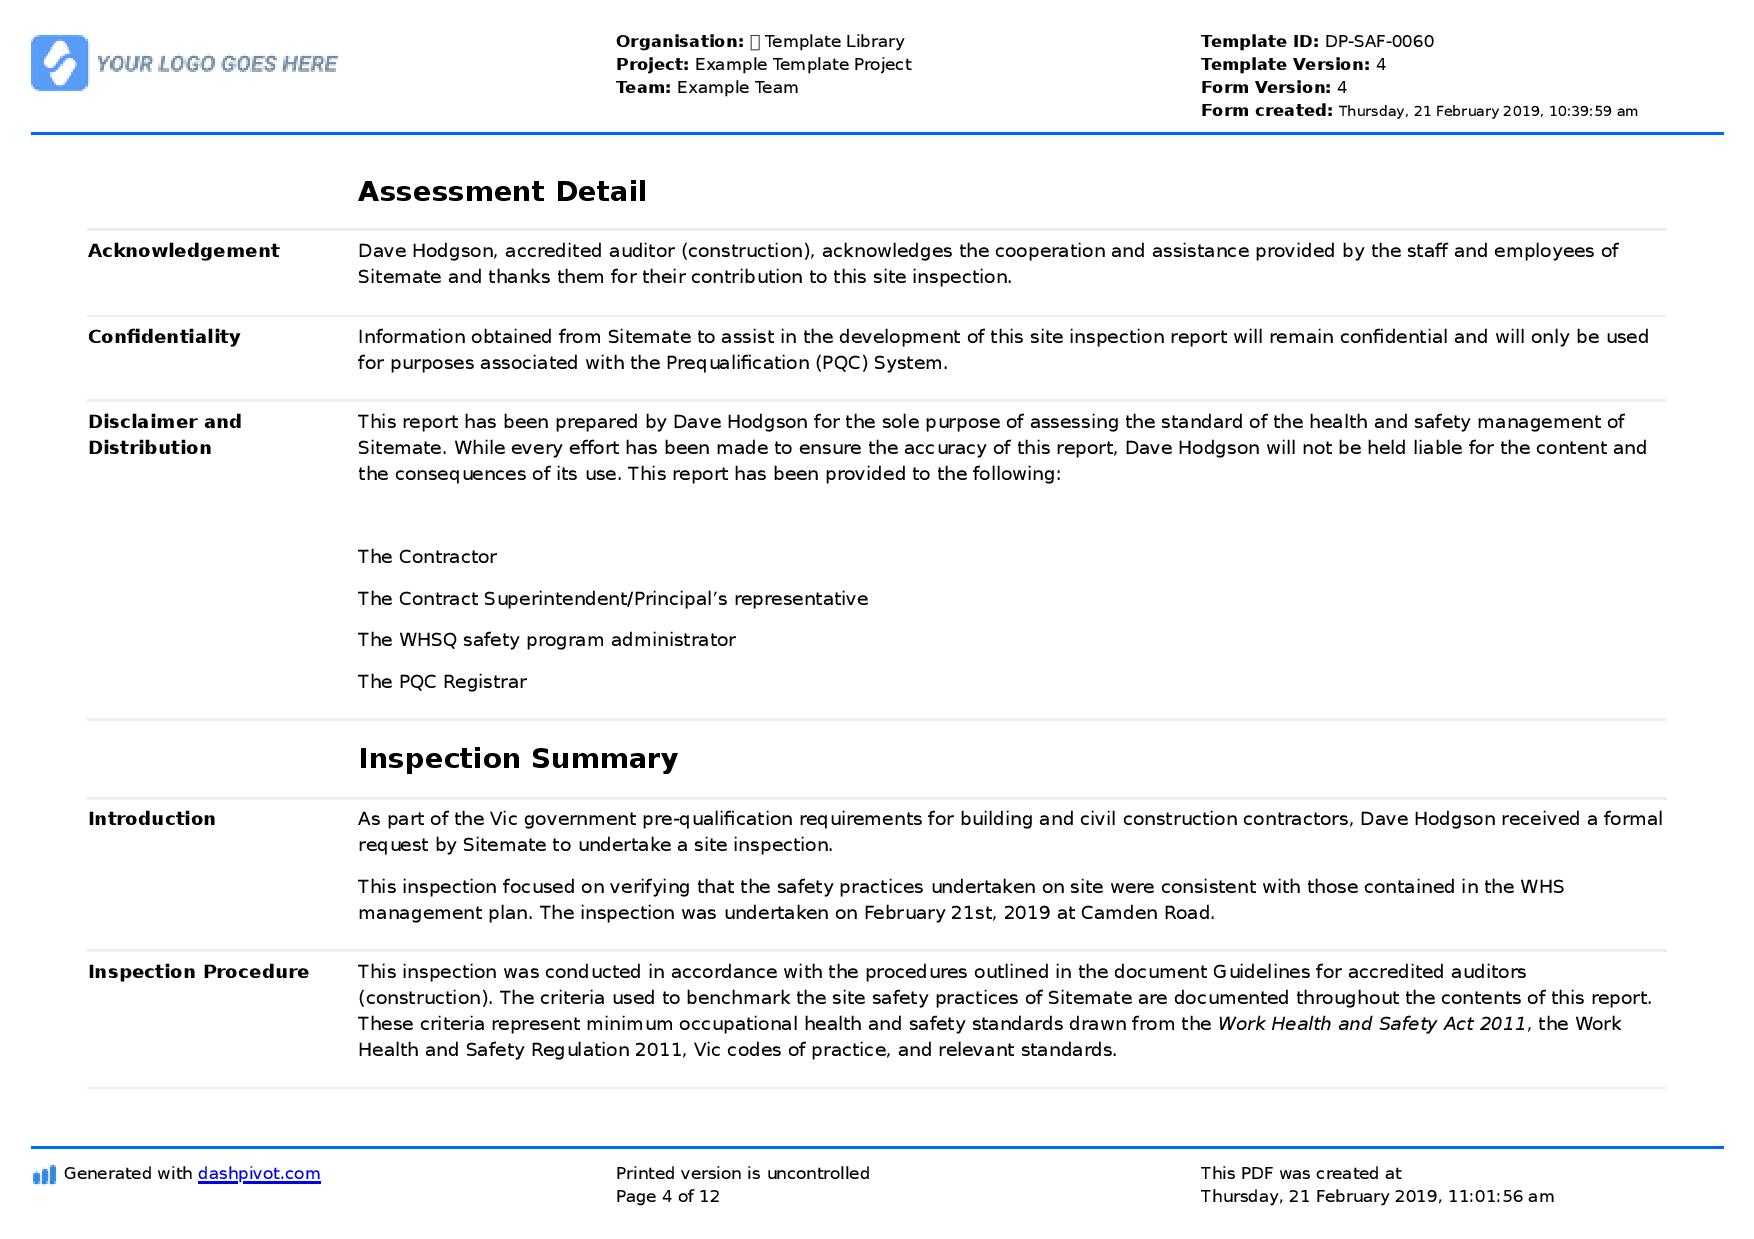 Site Inspection Report: Free Template, Sample And A Proven Throughout Property Management Inspection Report Template